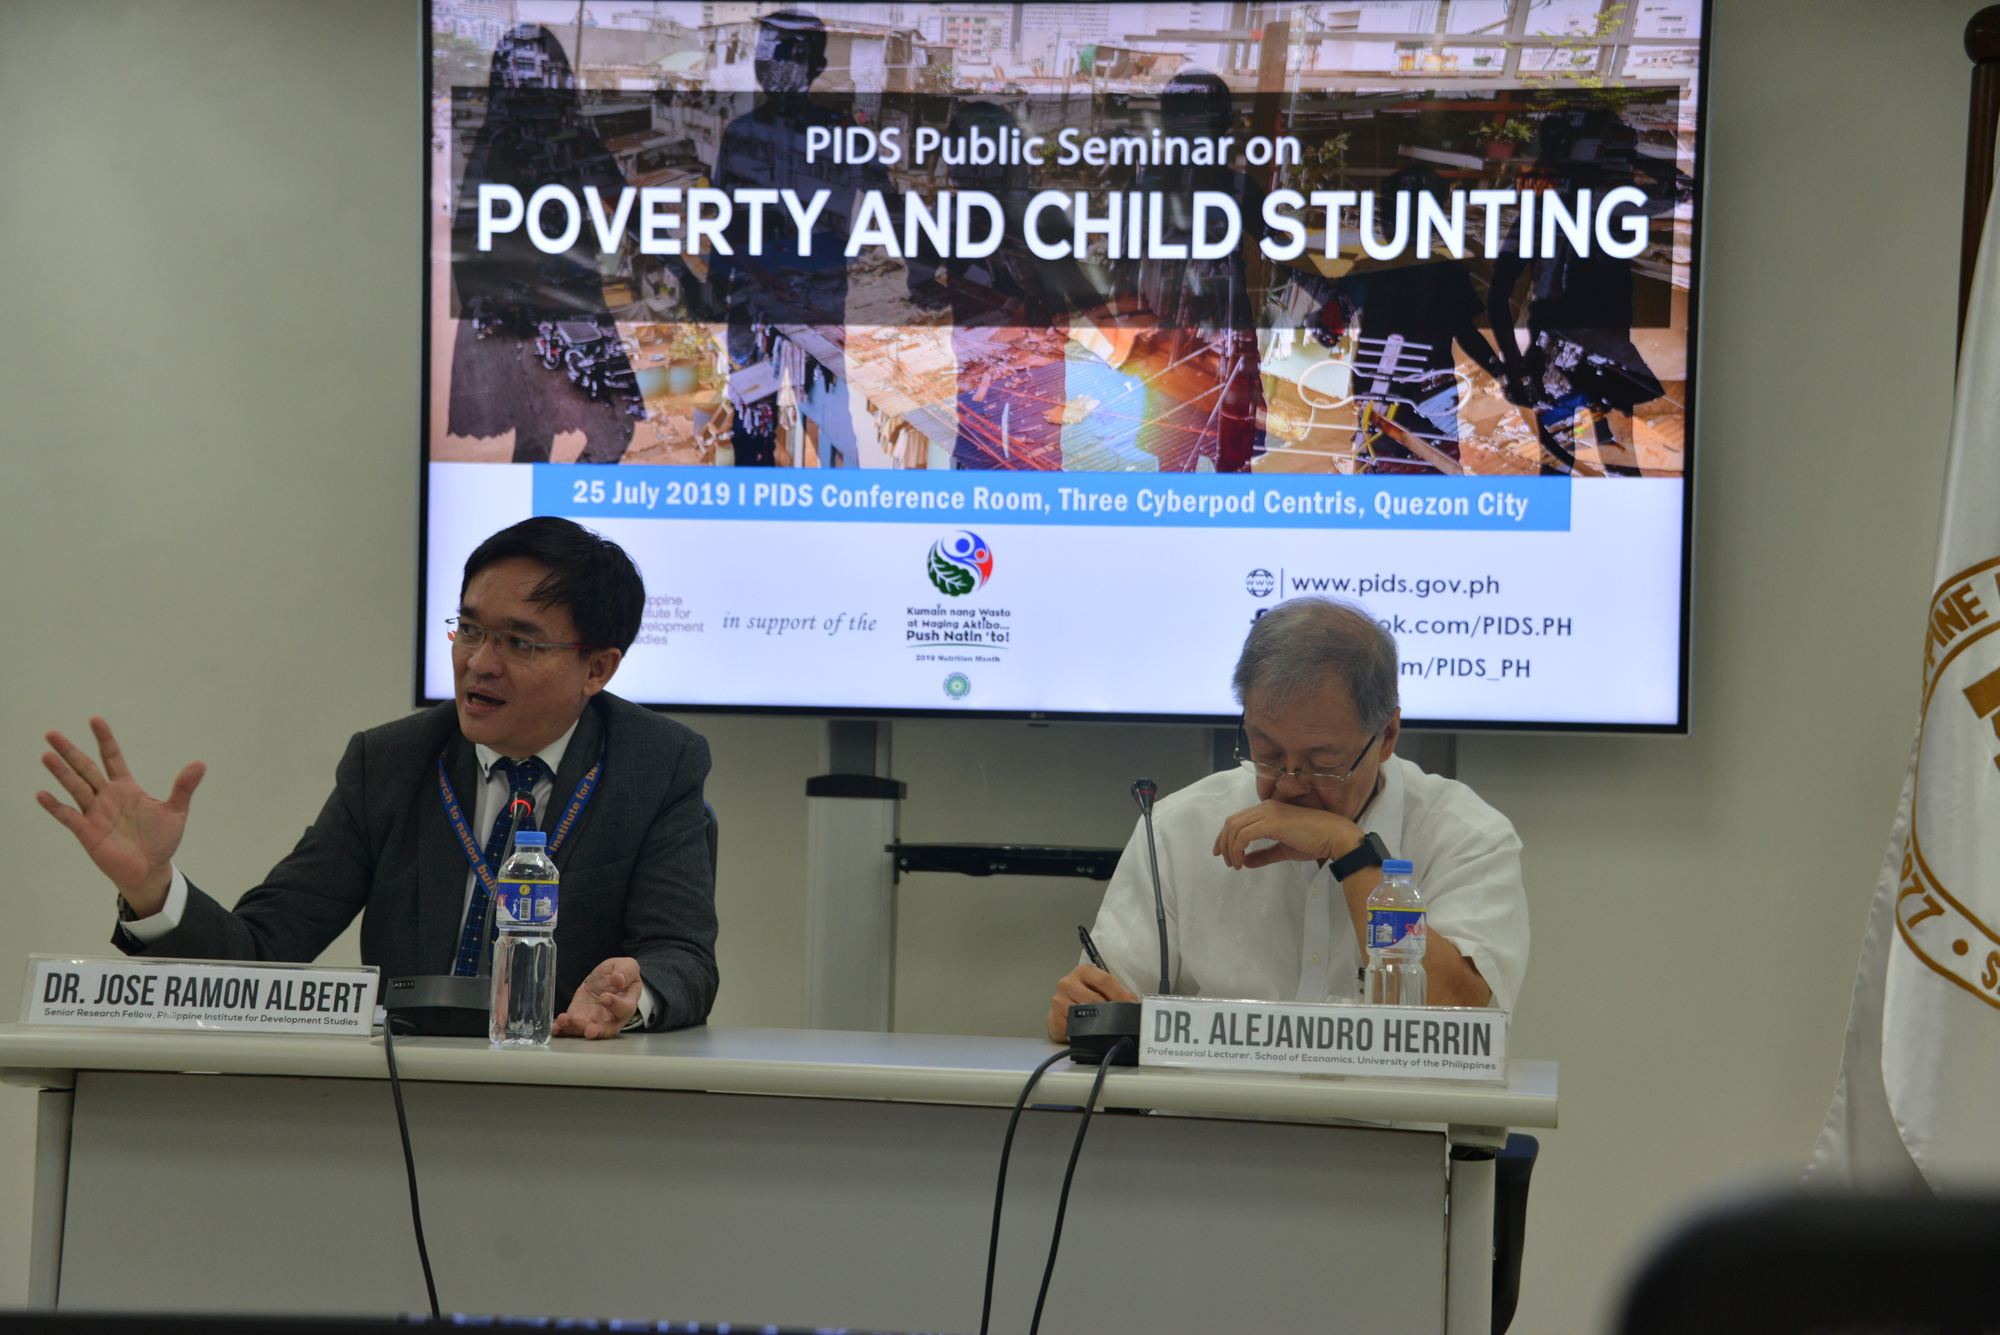 Public Seminar on Poverty and Child Stunting-pids-poverty-1-20190725.jpg